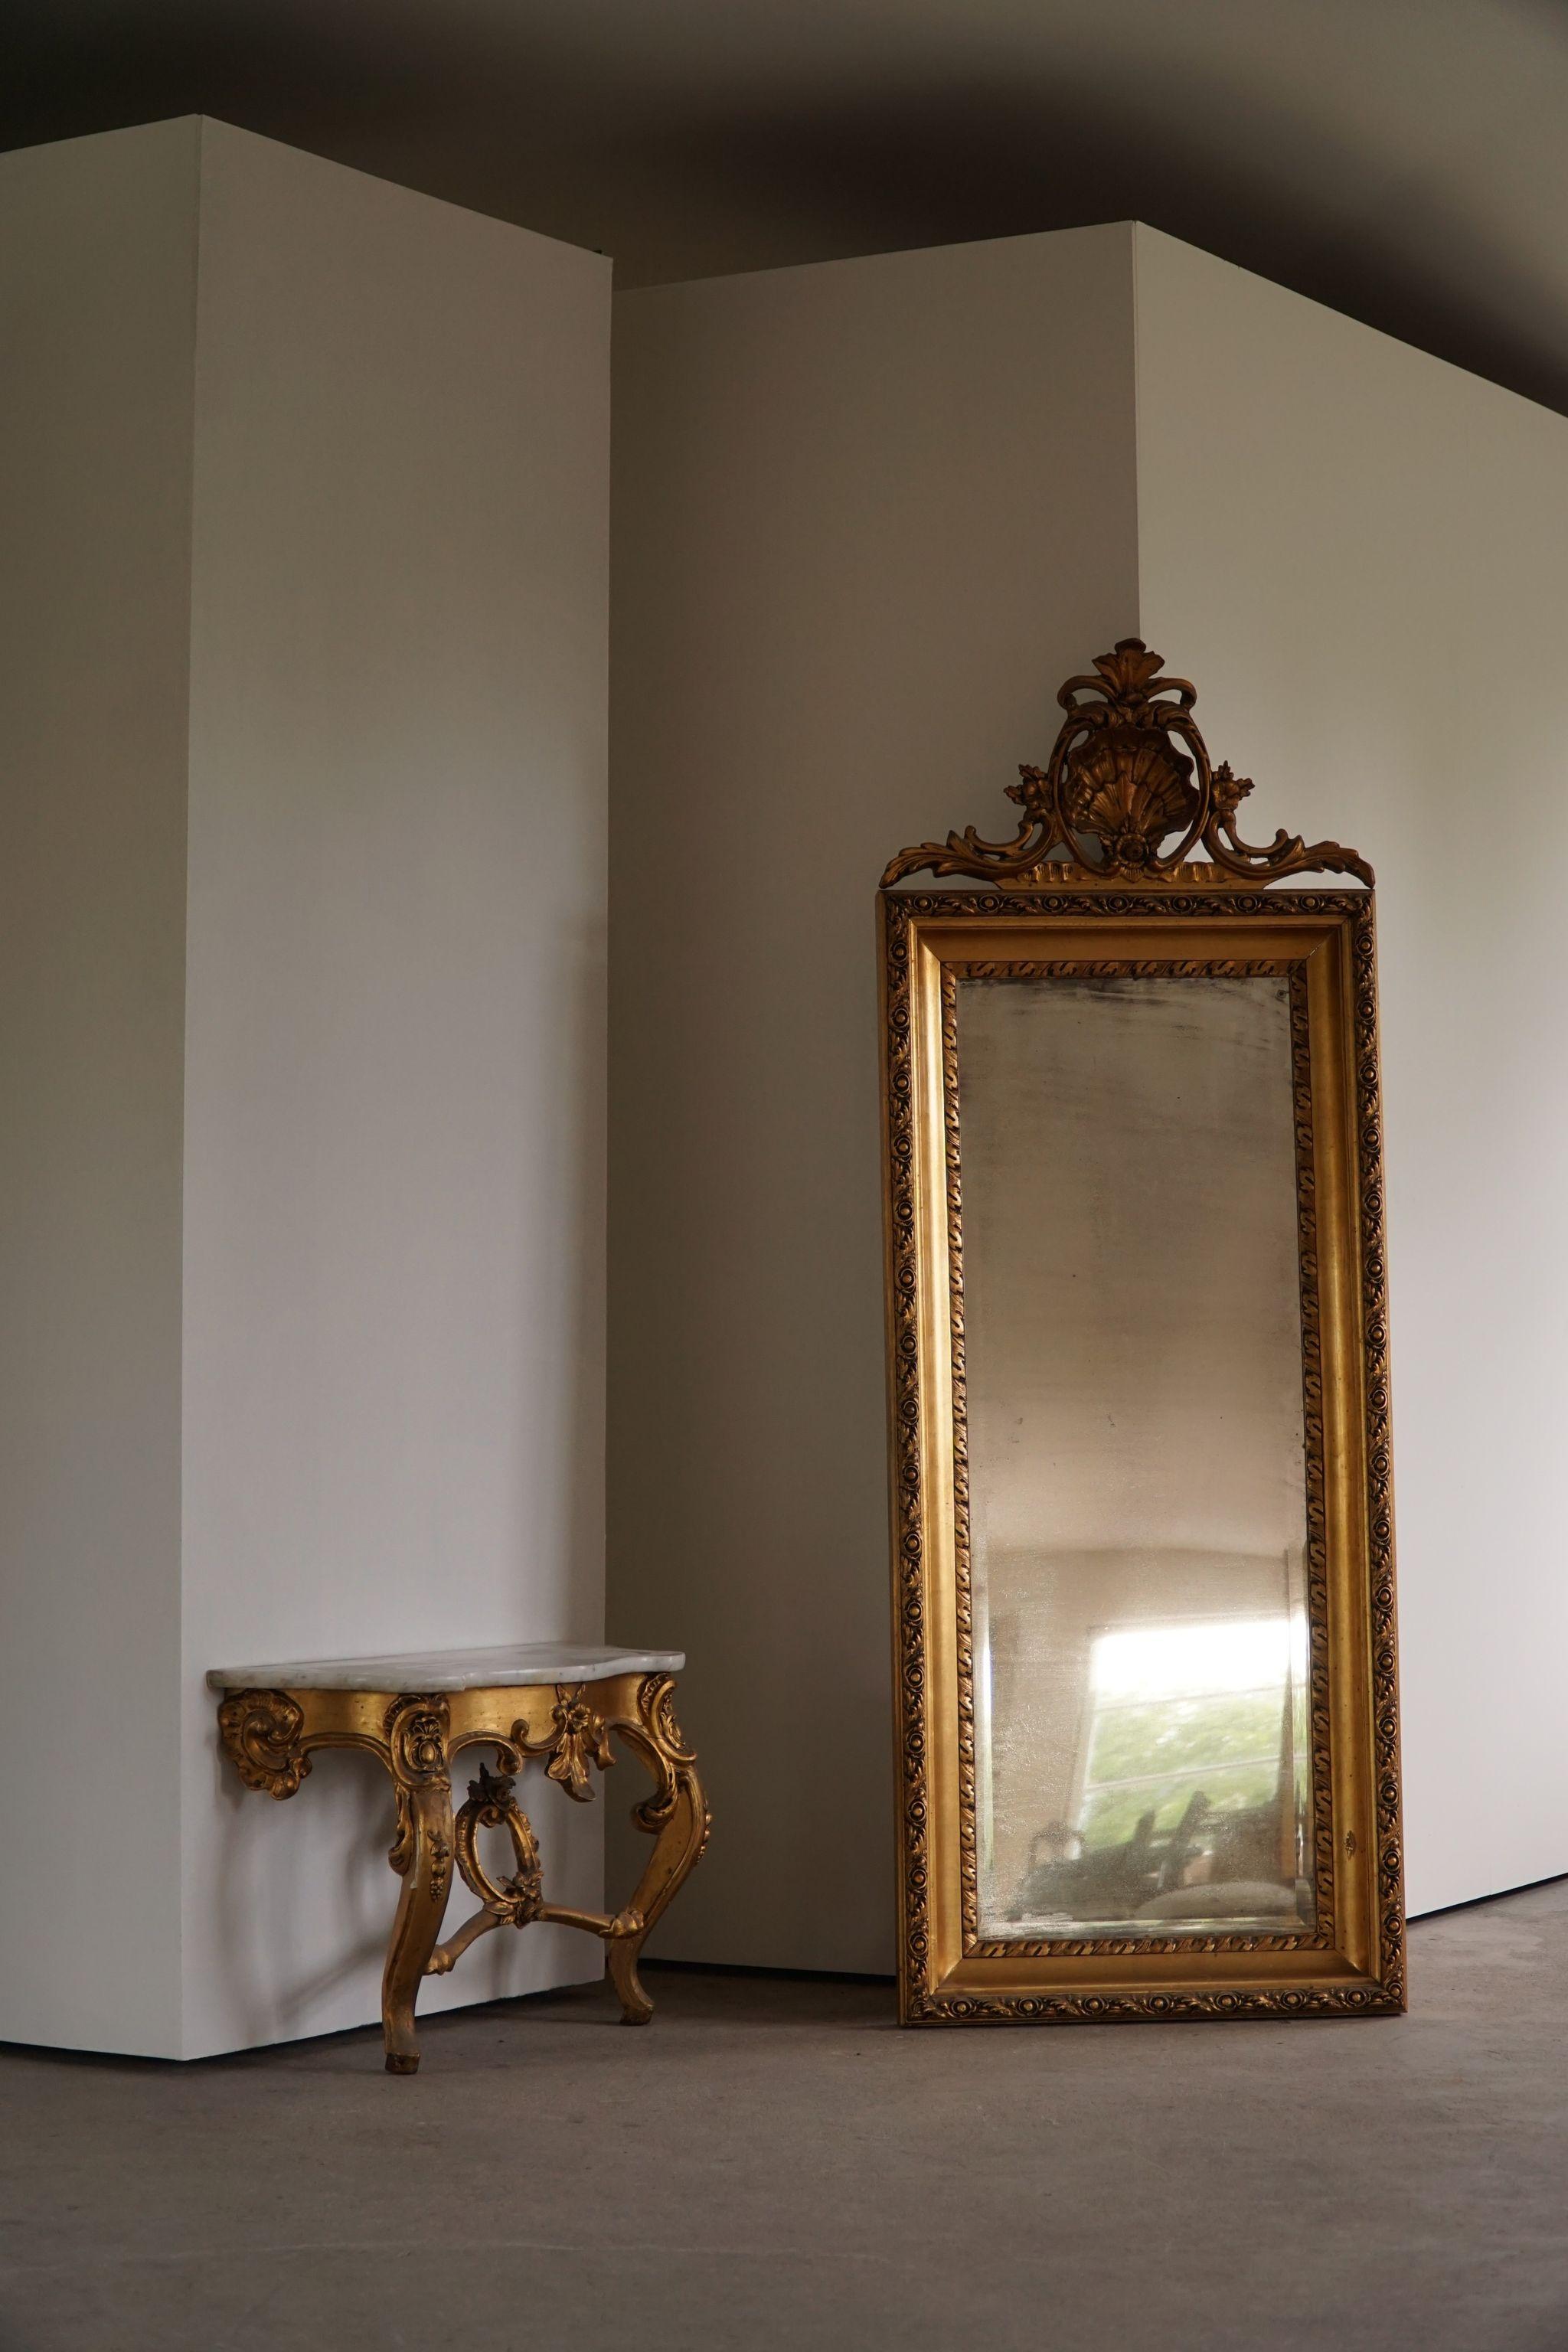 Antique Danish Mid-19th Century Rococo Gold Plated Mirror For Sale 3